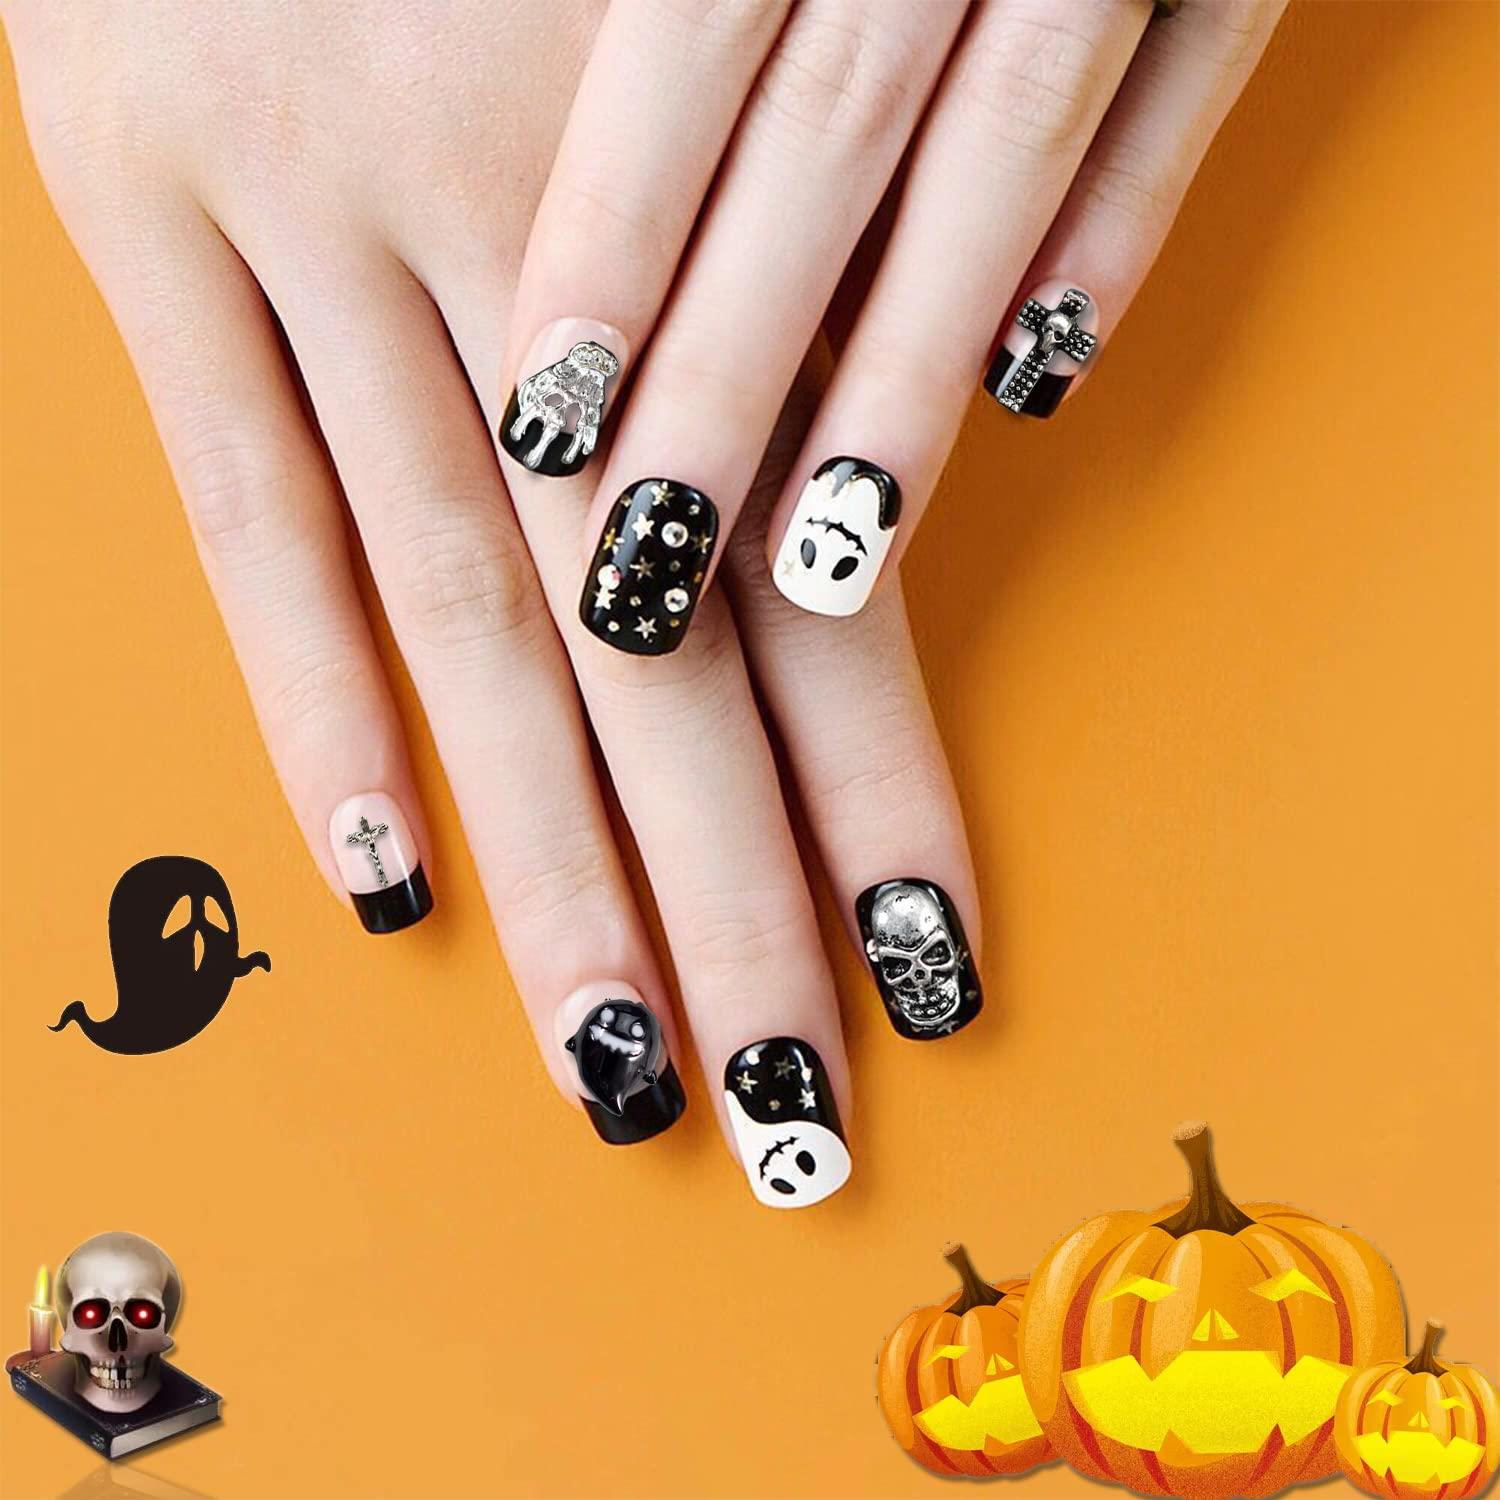 3D Gold Skull Nail Charms Halloween Decoration